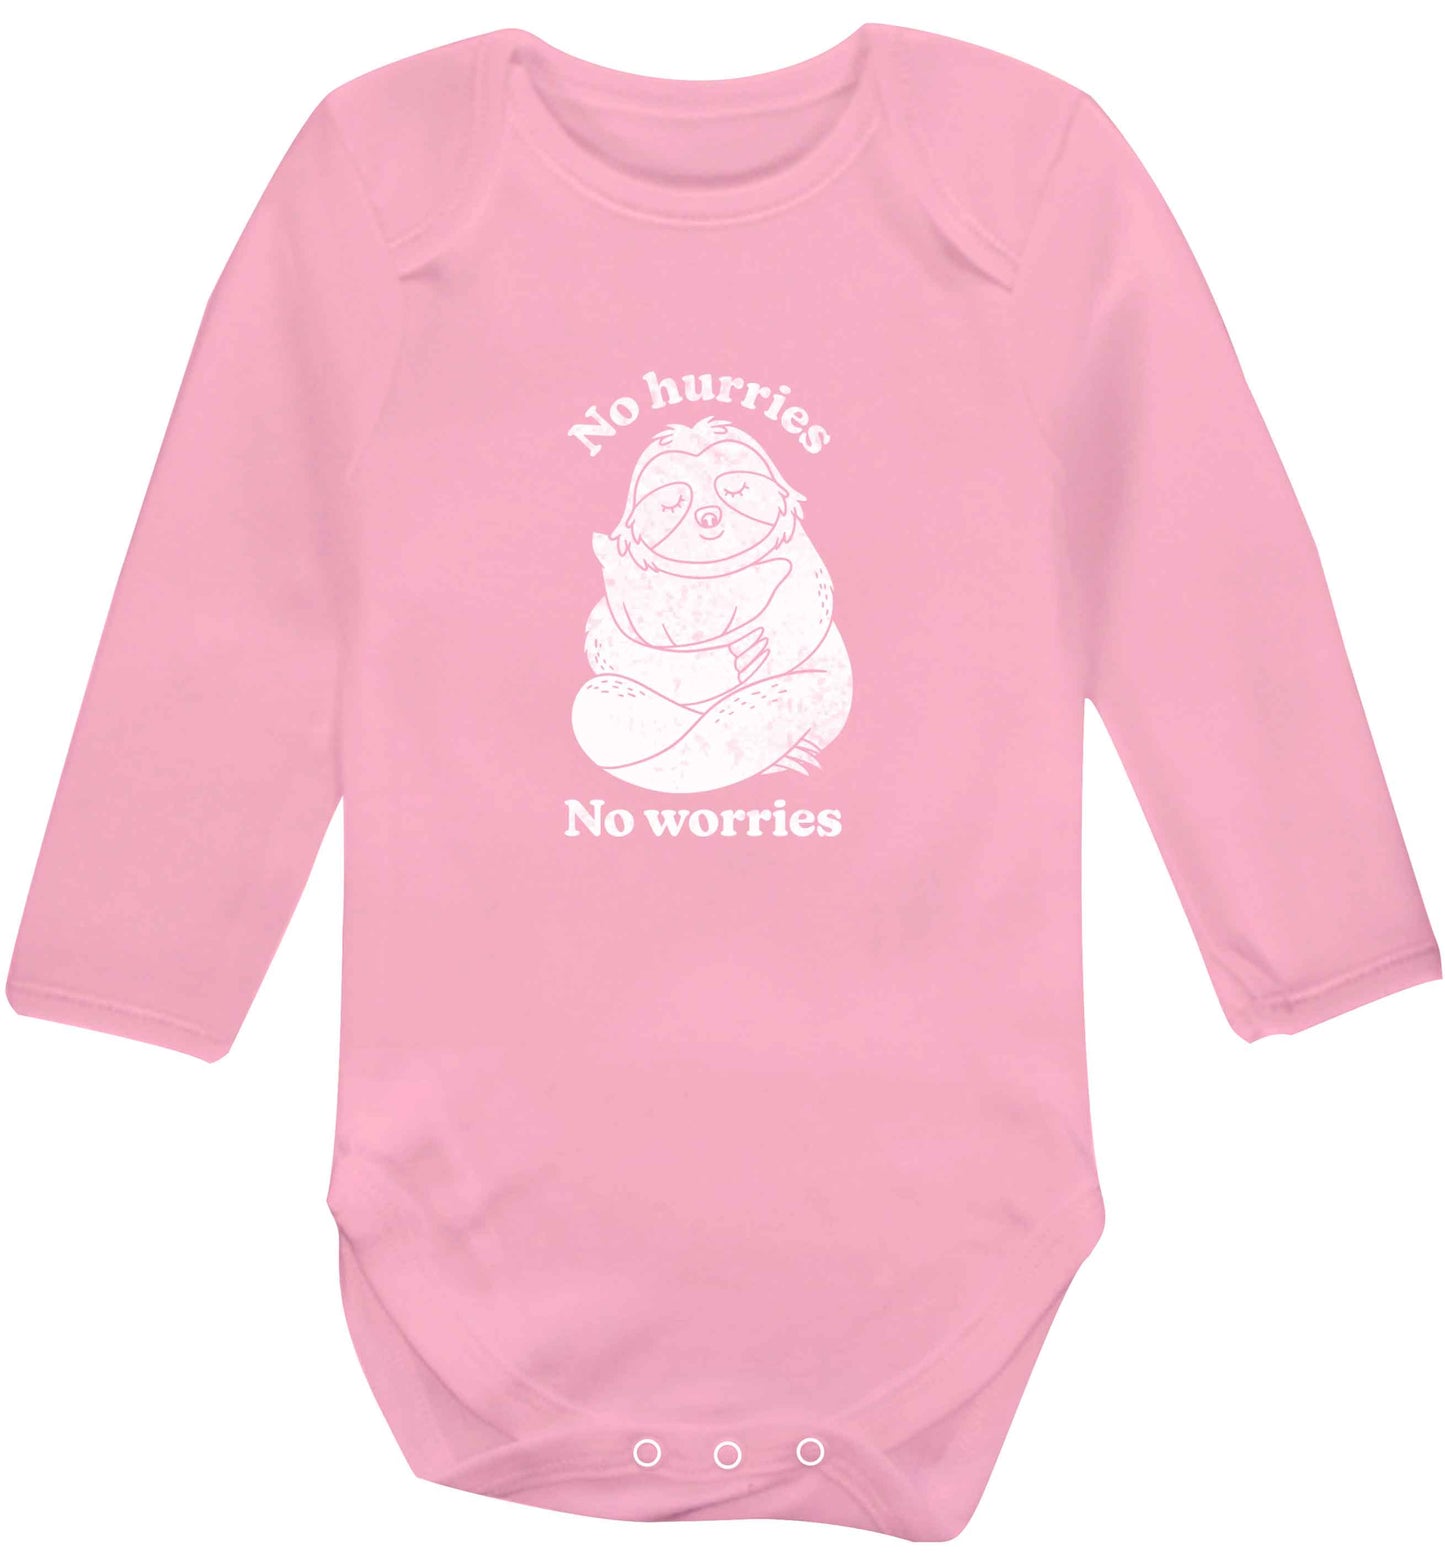 No hurries no worries baby vest long sleeved pale pink 6-12 months